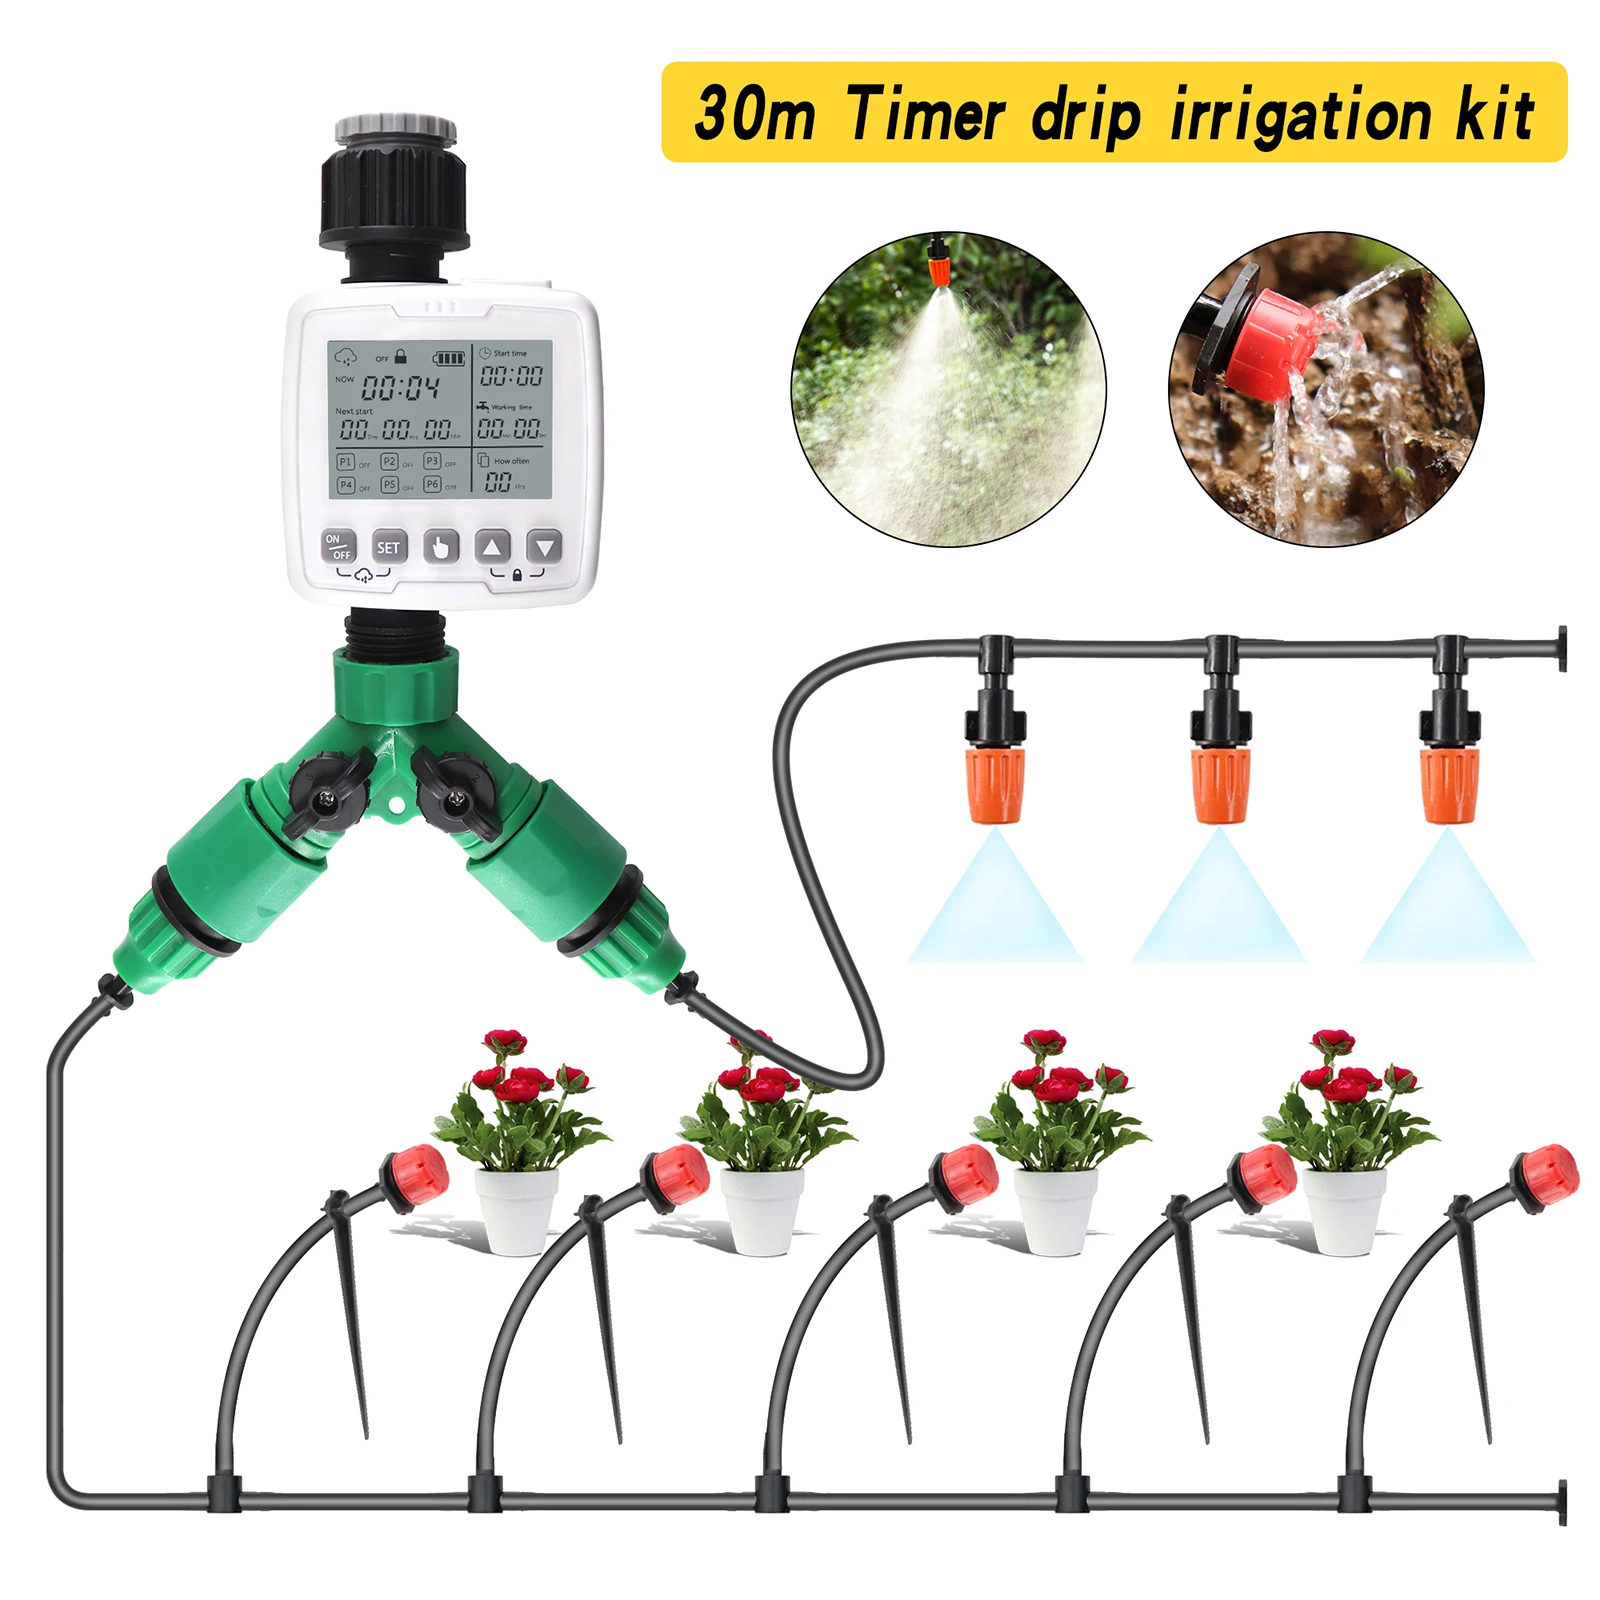 Automatic Irrigation System Home Drip Irrigation Watering Kits System Sprinkler with Smart Controller for Garden Bonsai Indoor